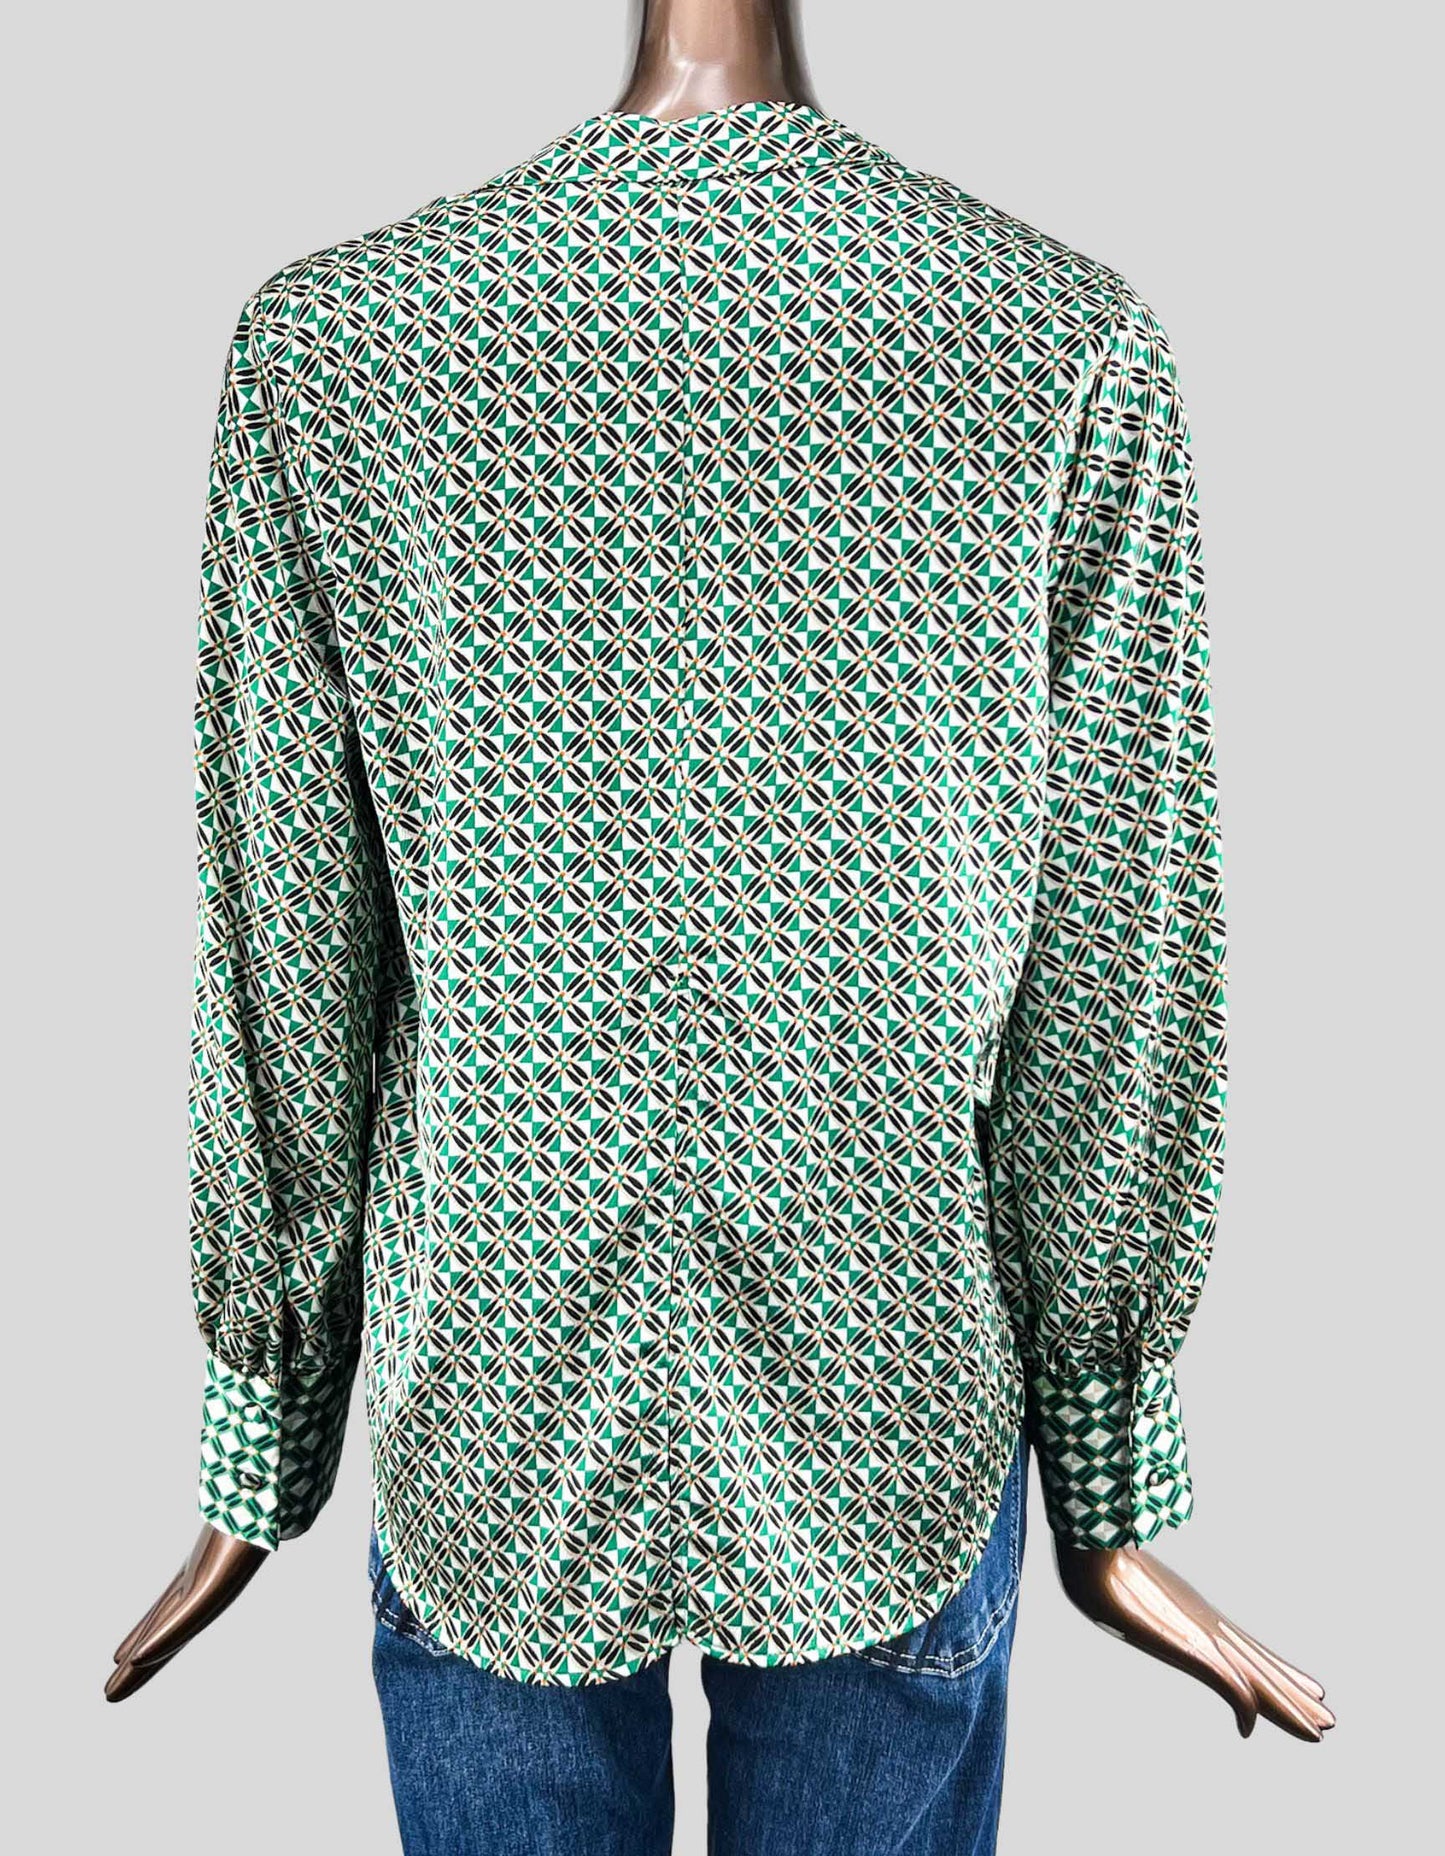 Zara Green Patterned Blouse with Tie - Small